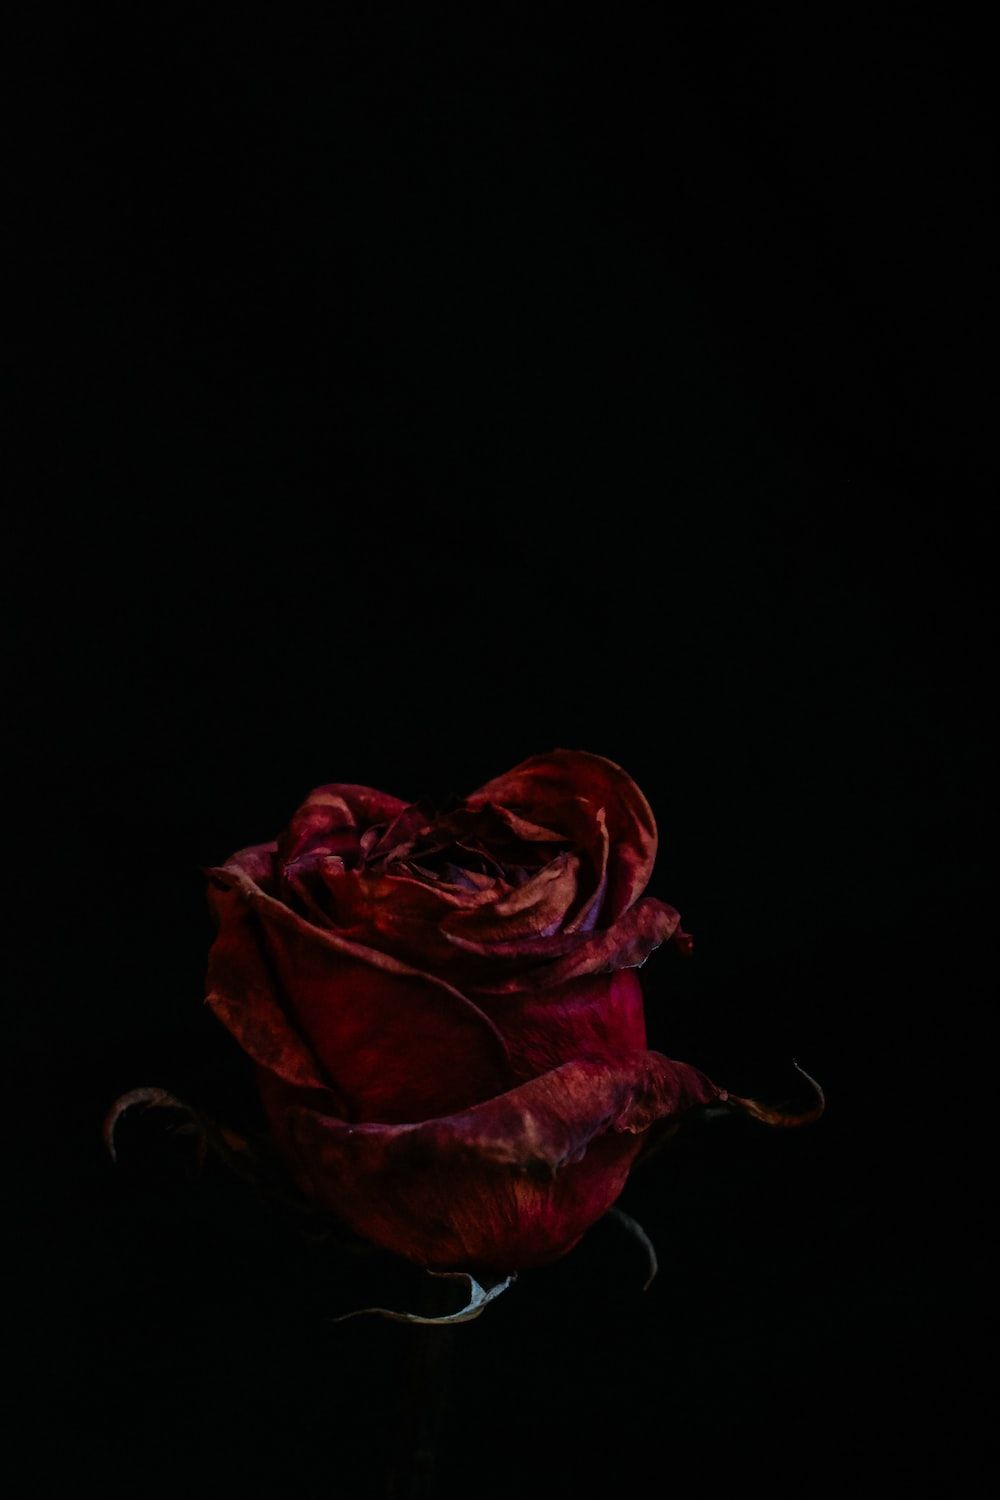 A red rose on a black background - Blood